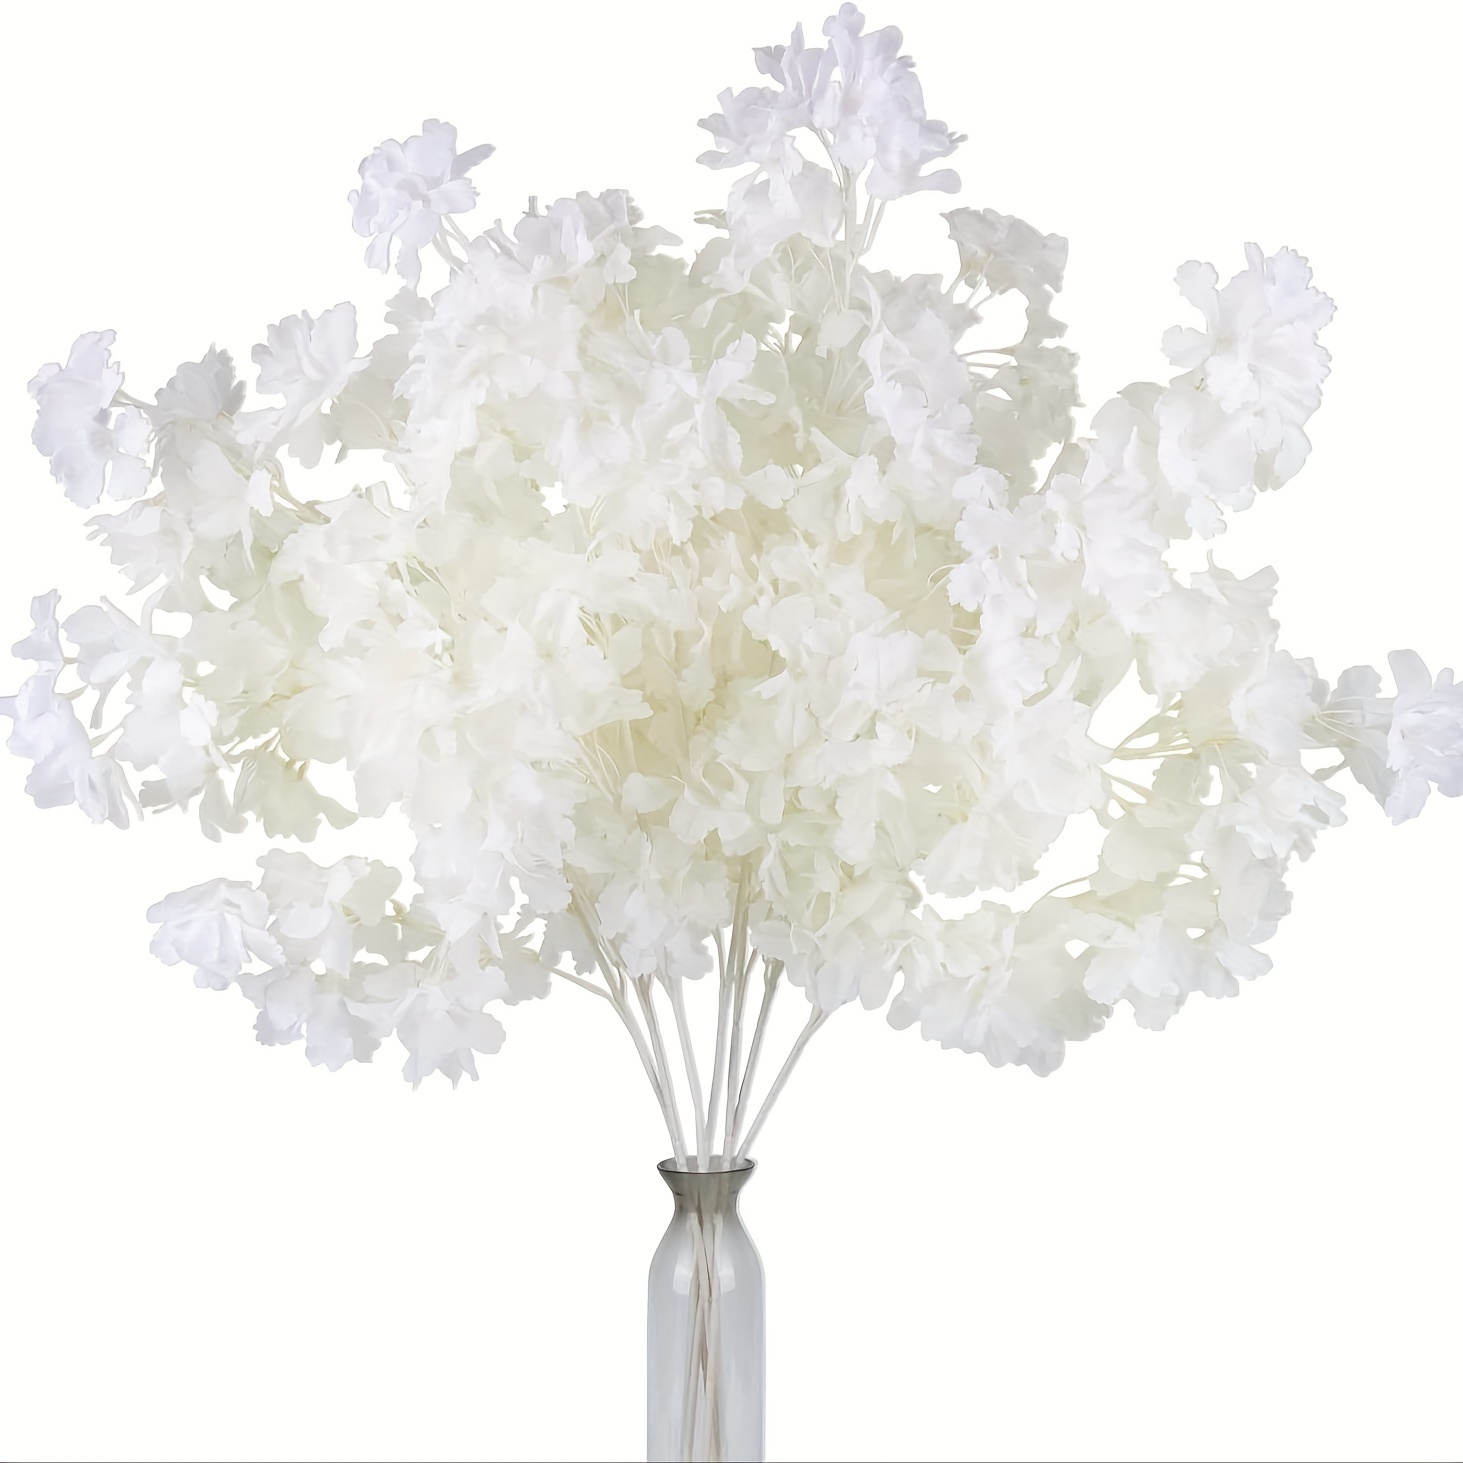 

5pcs Amazing Artificial Cherry Branch Decoration, 33 Inch (approximately 85 Cm) High Floor Vase Used For Wedding Home Decoration, White Flowers In The Center Of The Dining Table Decoration, White